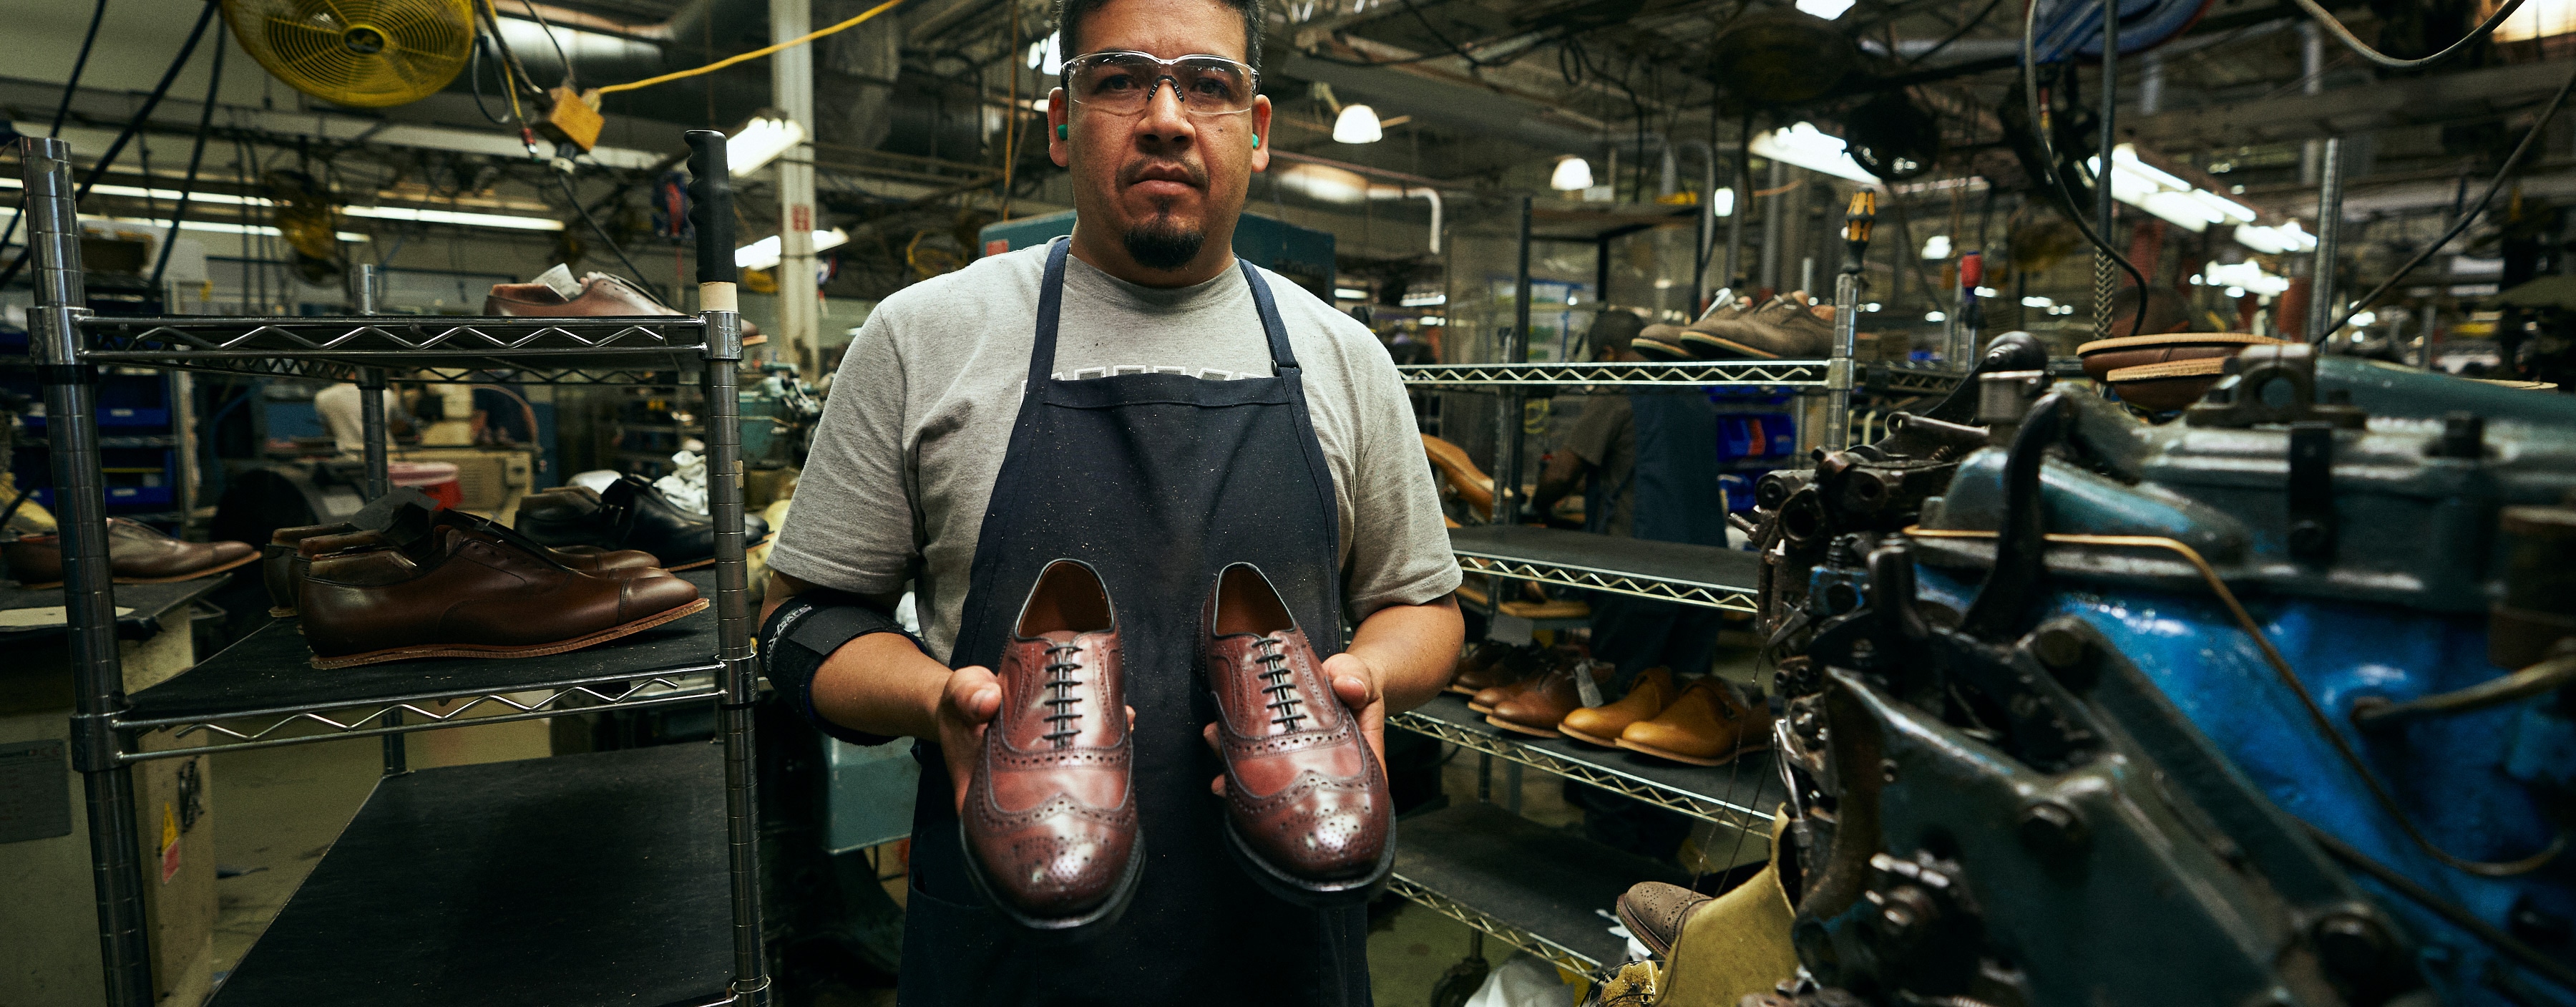 Image of a man in a shoe factory wearing safety goggles and ear plugs and holding up a pair of brown dress shoes